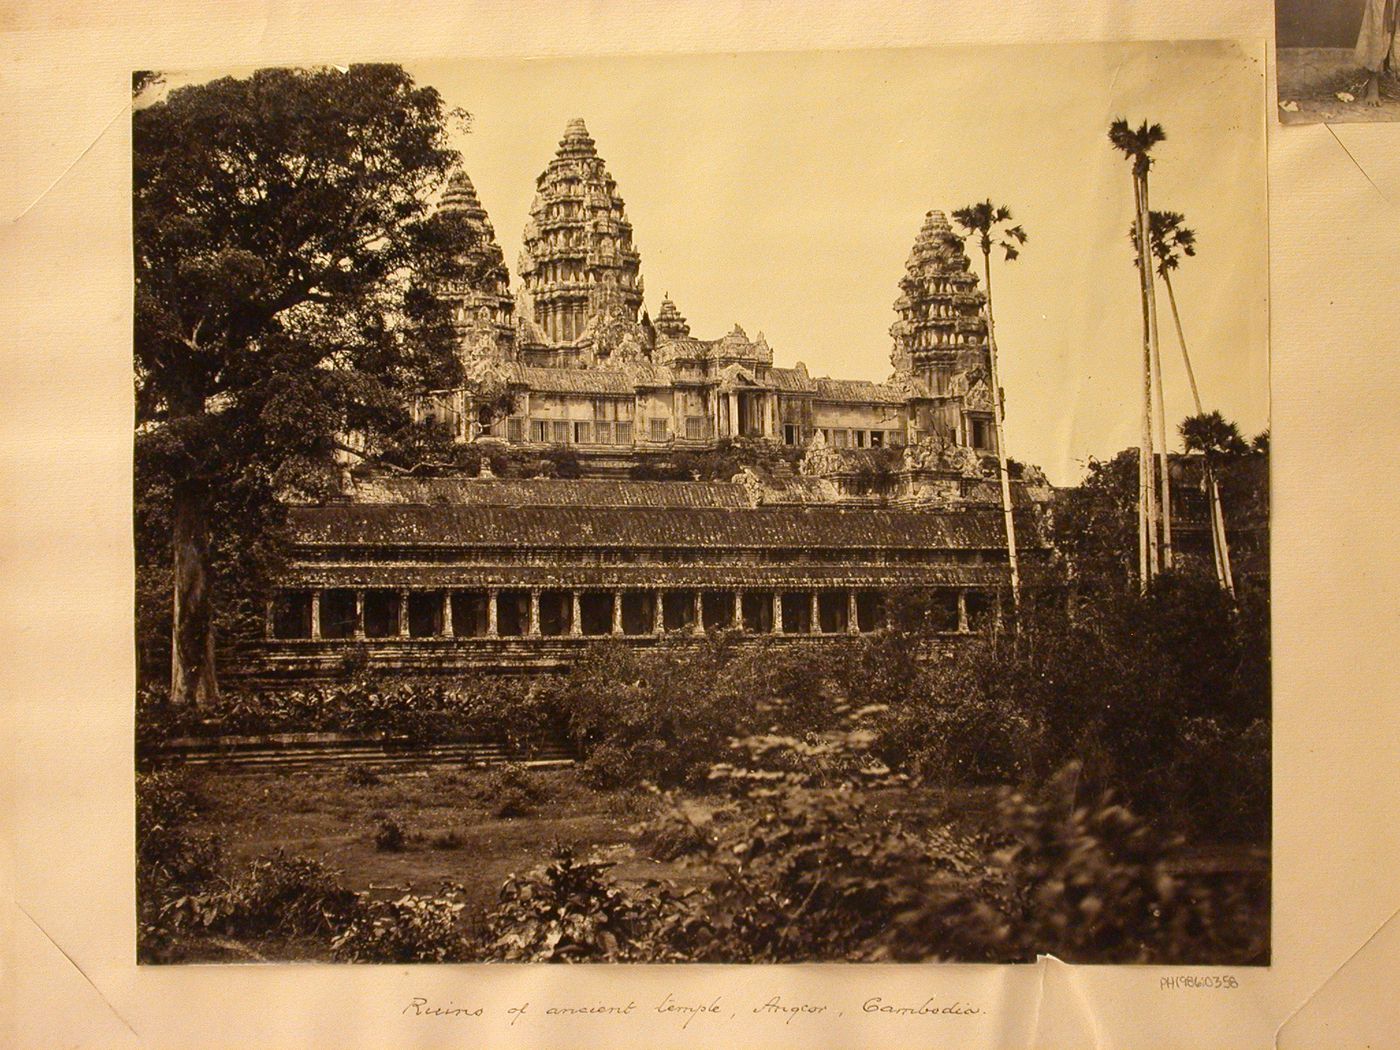 View of the third gallery and the central towers, Angkor Wat, Siam (now in Cambodia)